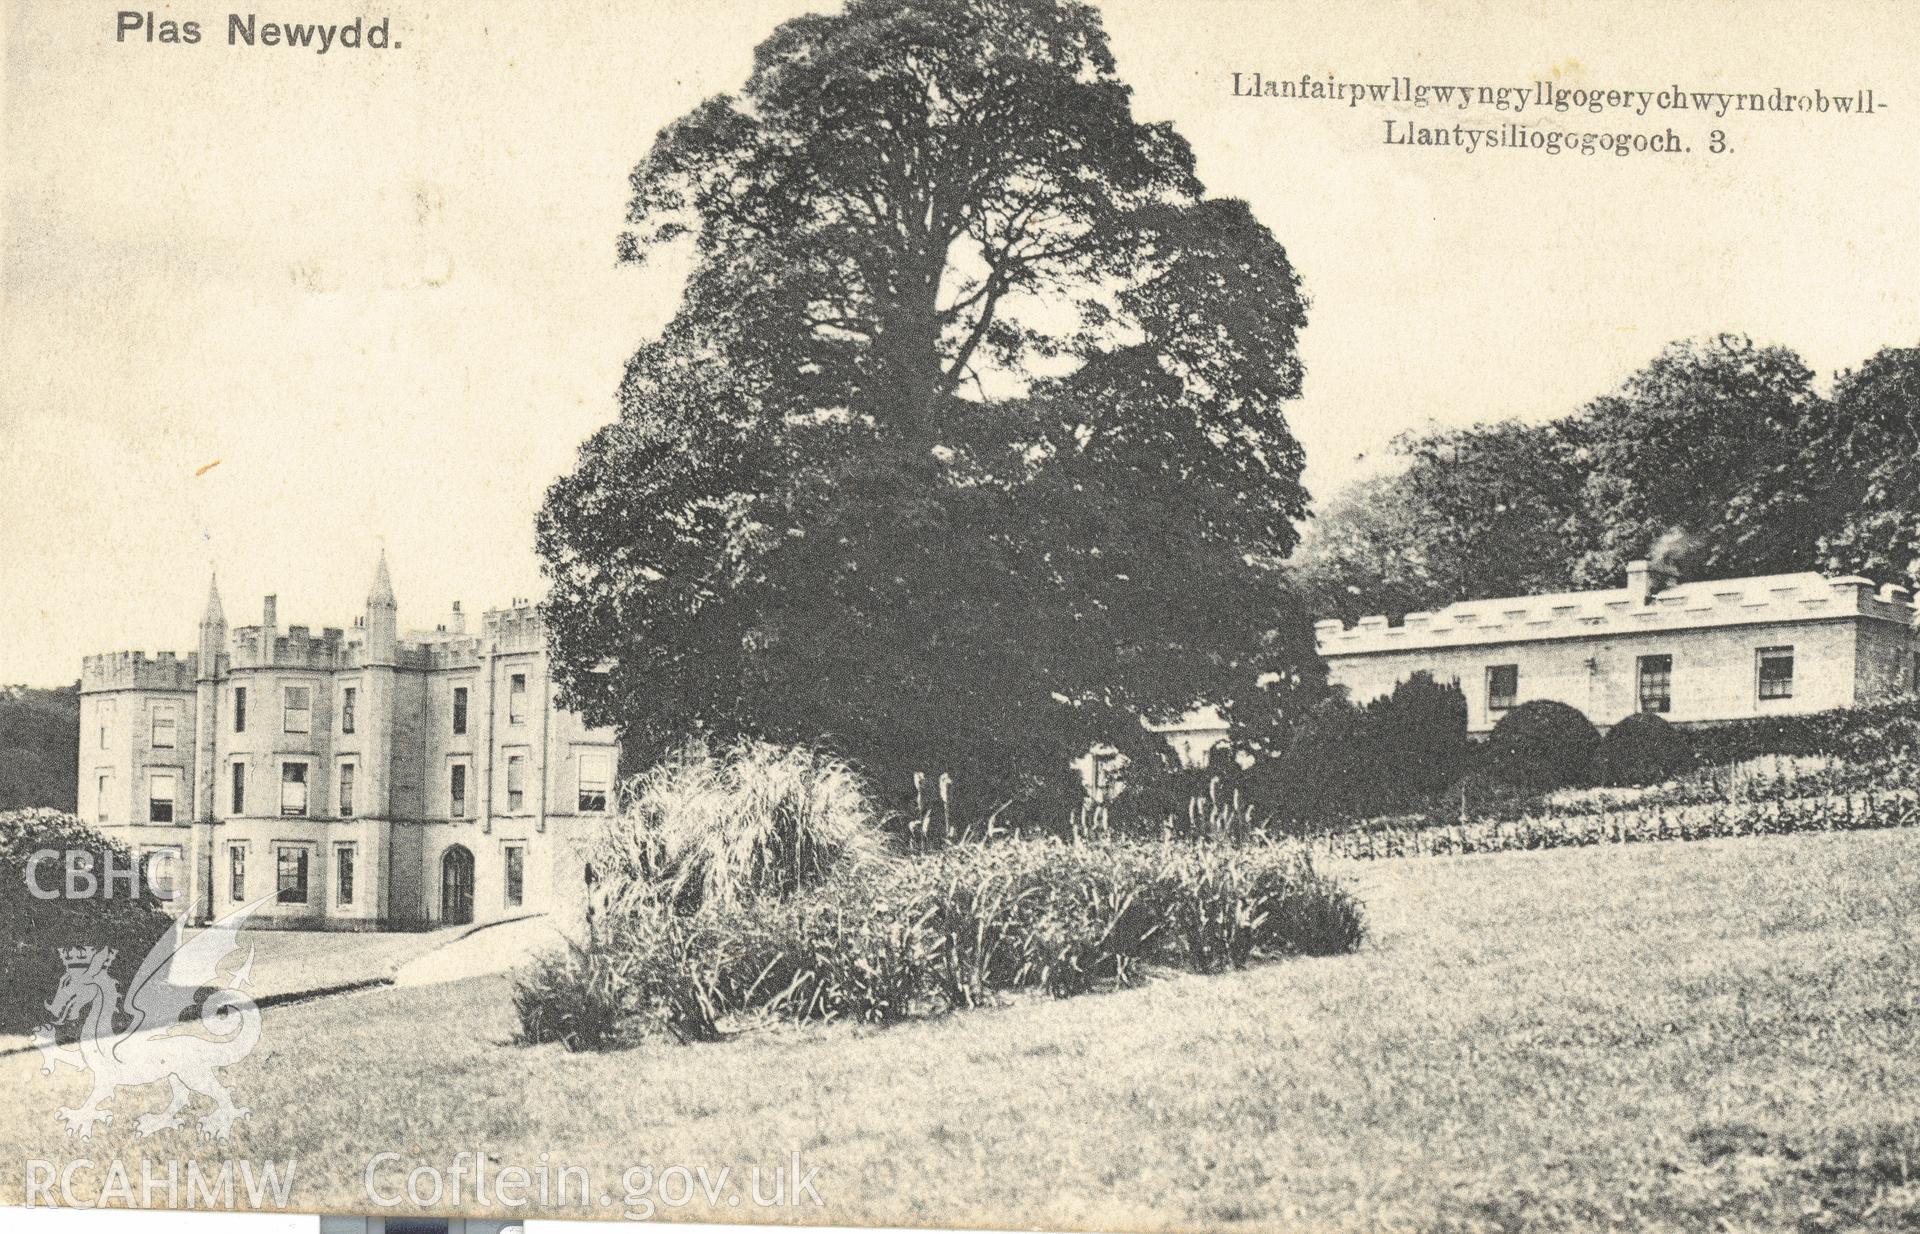 Digitised postcard image of Plas Newydd, Llanddaniel Fab, E.E. Roberts' Series  LlanfairPG. Produced by Parks and Gardens Data Services, from an original item in the Peter Davis Collection at Parks and Gardens UK. We hold only web-resolution images of this collection, suitable for viewing on screen and for research purposes only. We do not hold the original images, or publication quality scans.